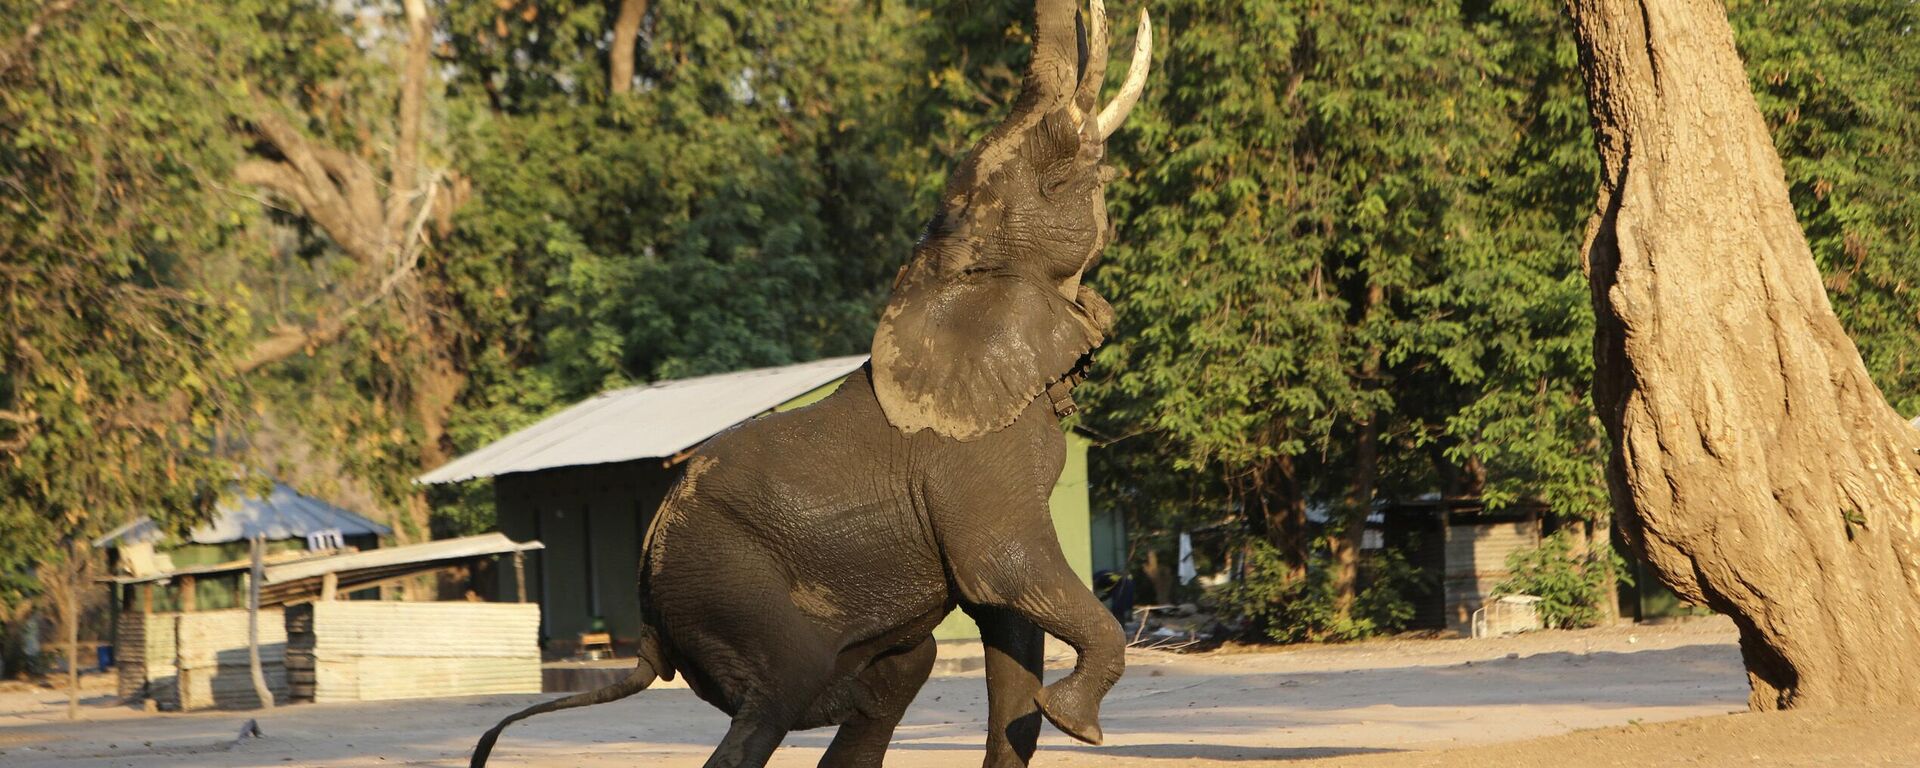 In this Oct, 27, 2019, photo, an elephant feeds on leaves from a tree in Mana Pools National Park, Zimbabwe. Wardens and wildlife lovers are trucking in food to help the distressed animals.  - Sputnik International, 1920, 18.12.2022